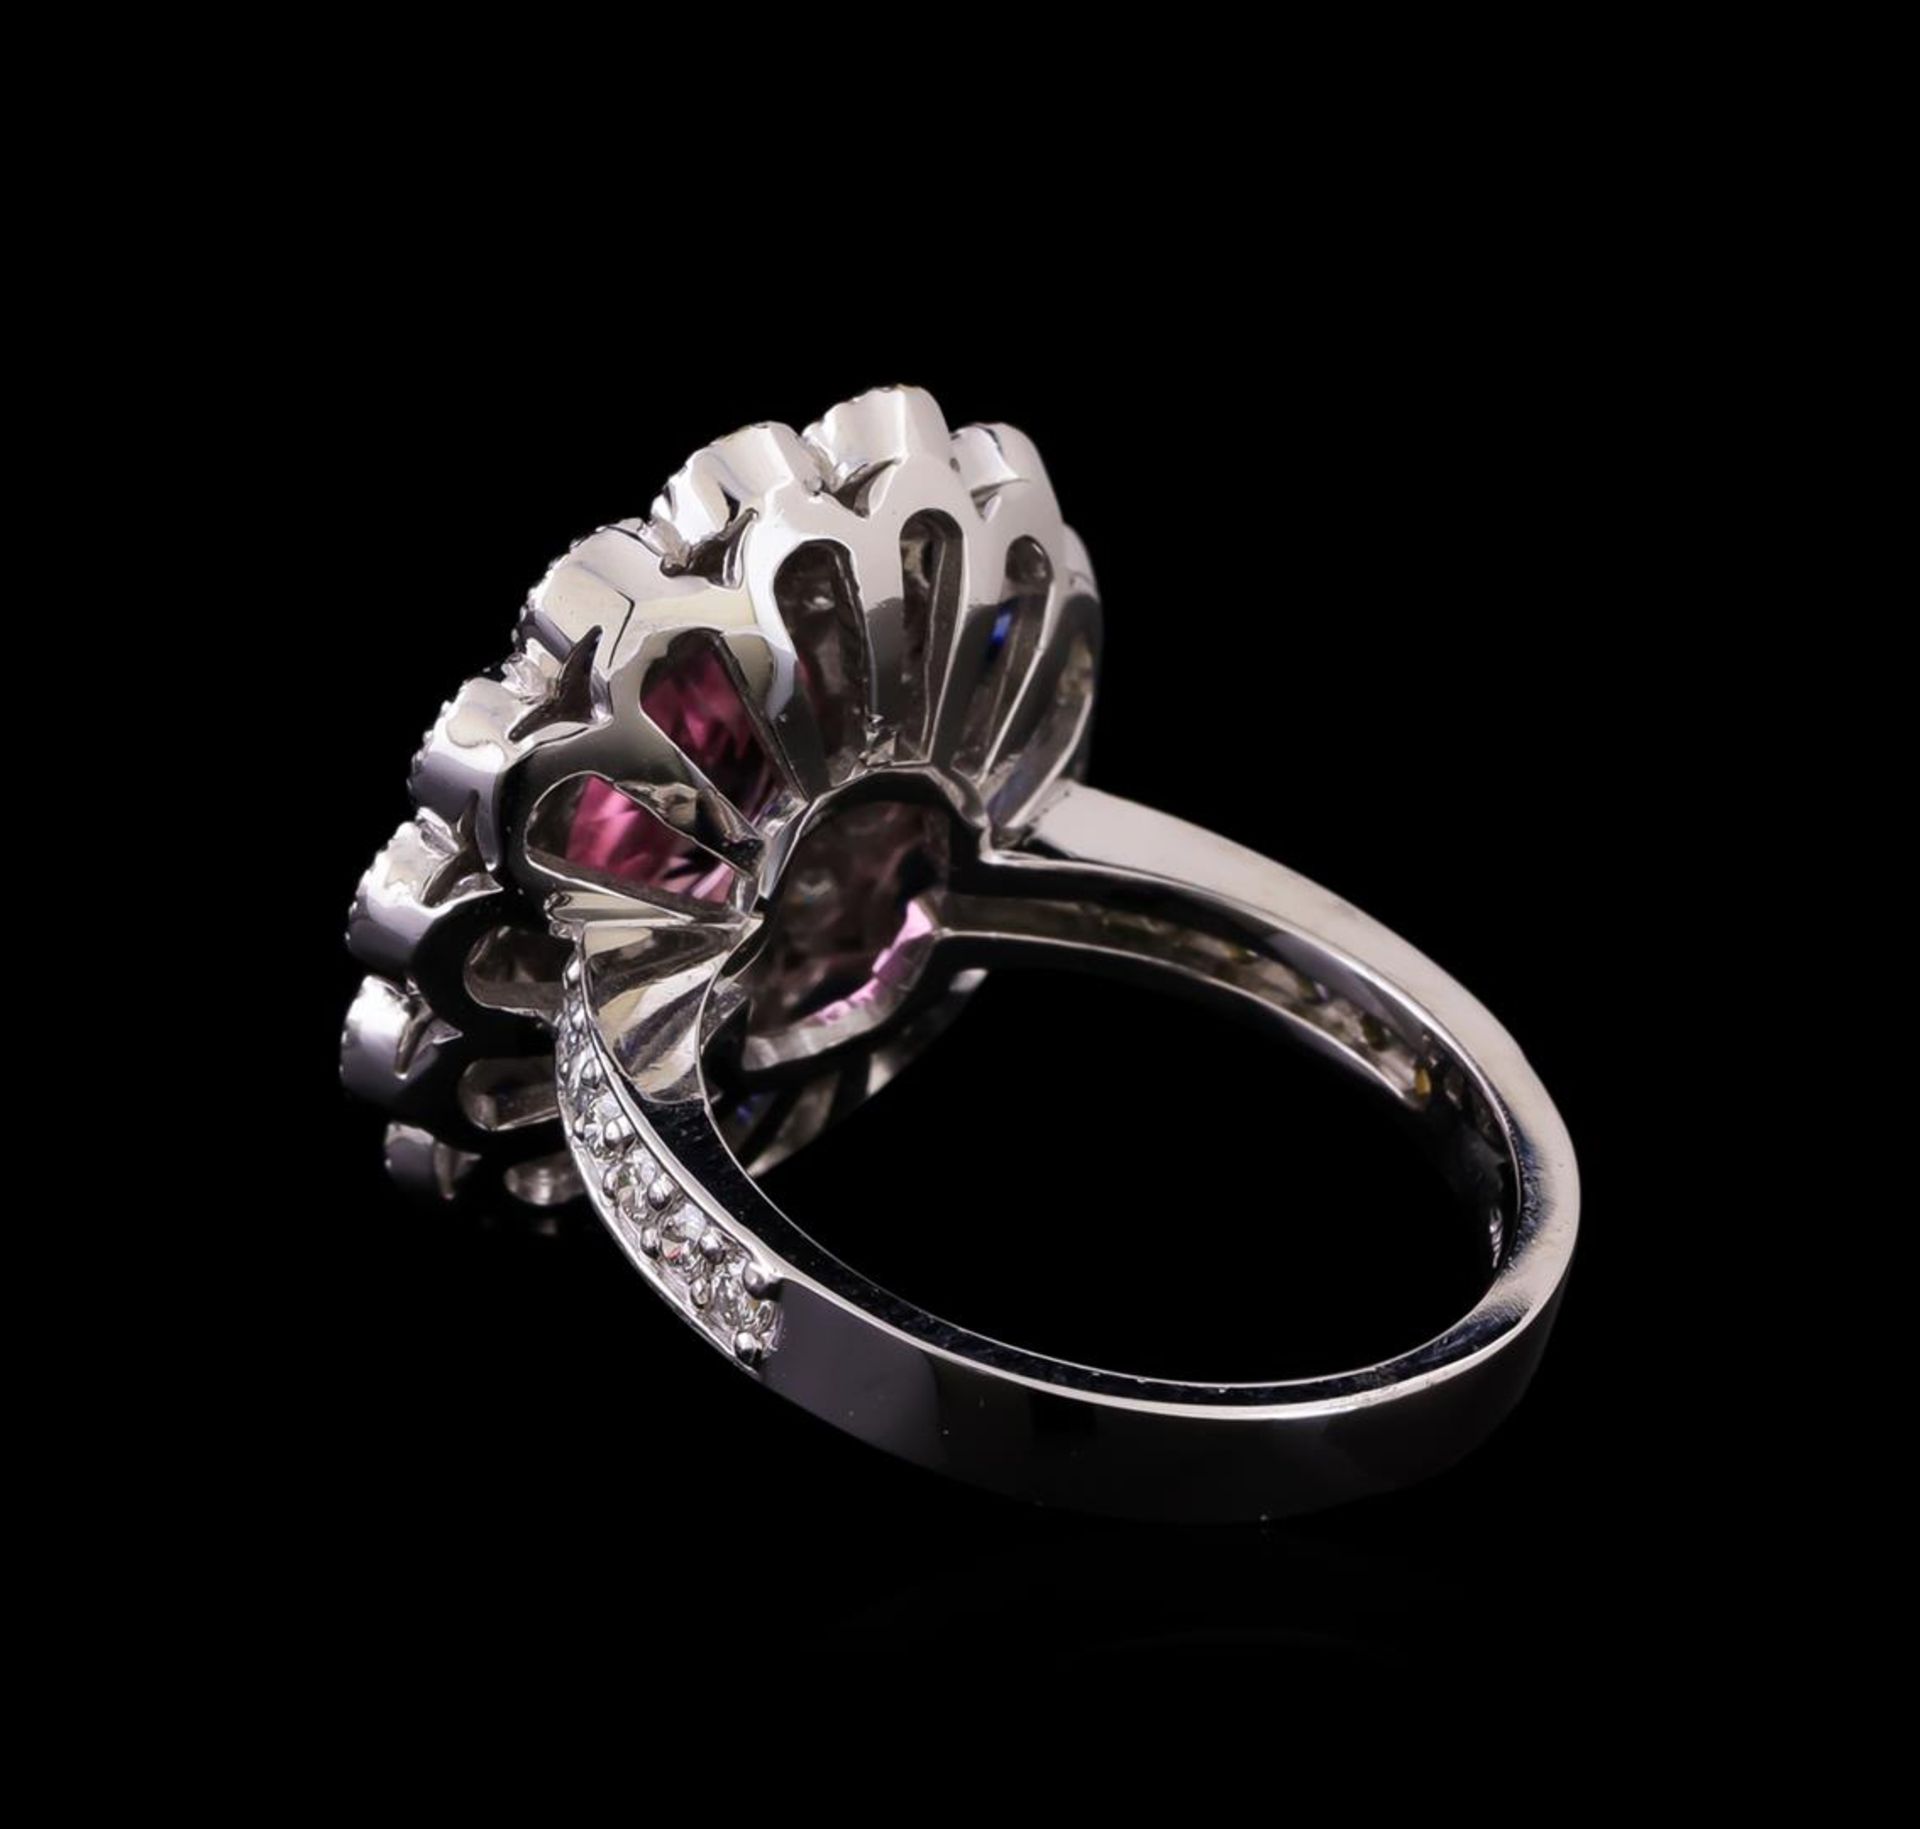 14KT White Gold 2.24 ctw Tourmaline, Sapphire and Diamond Ring - Image 3 of 5